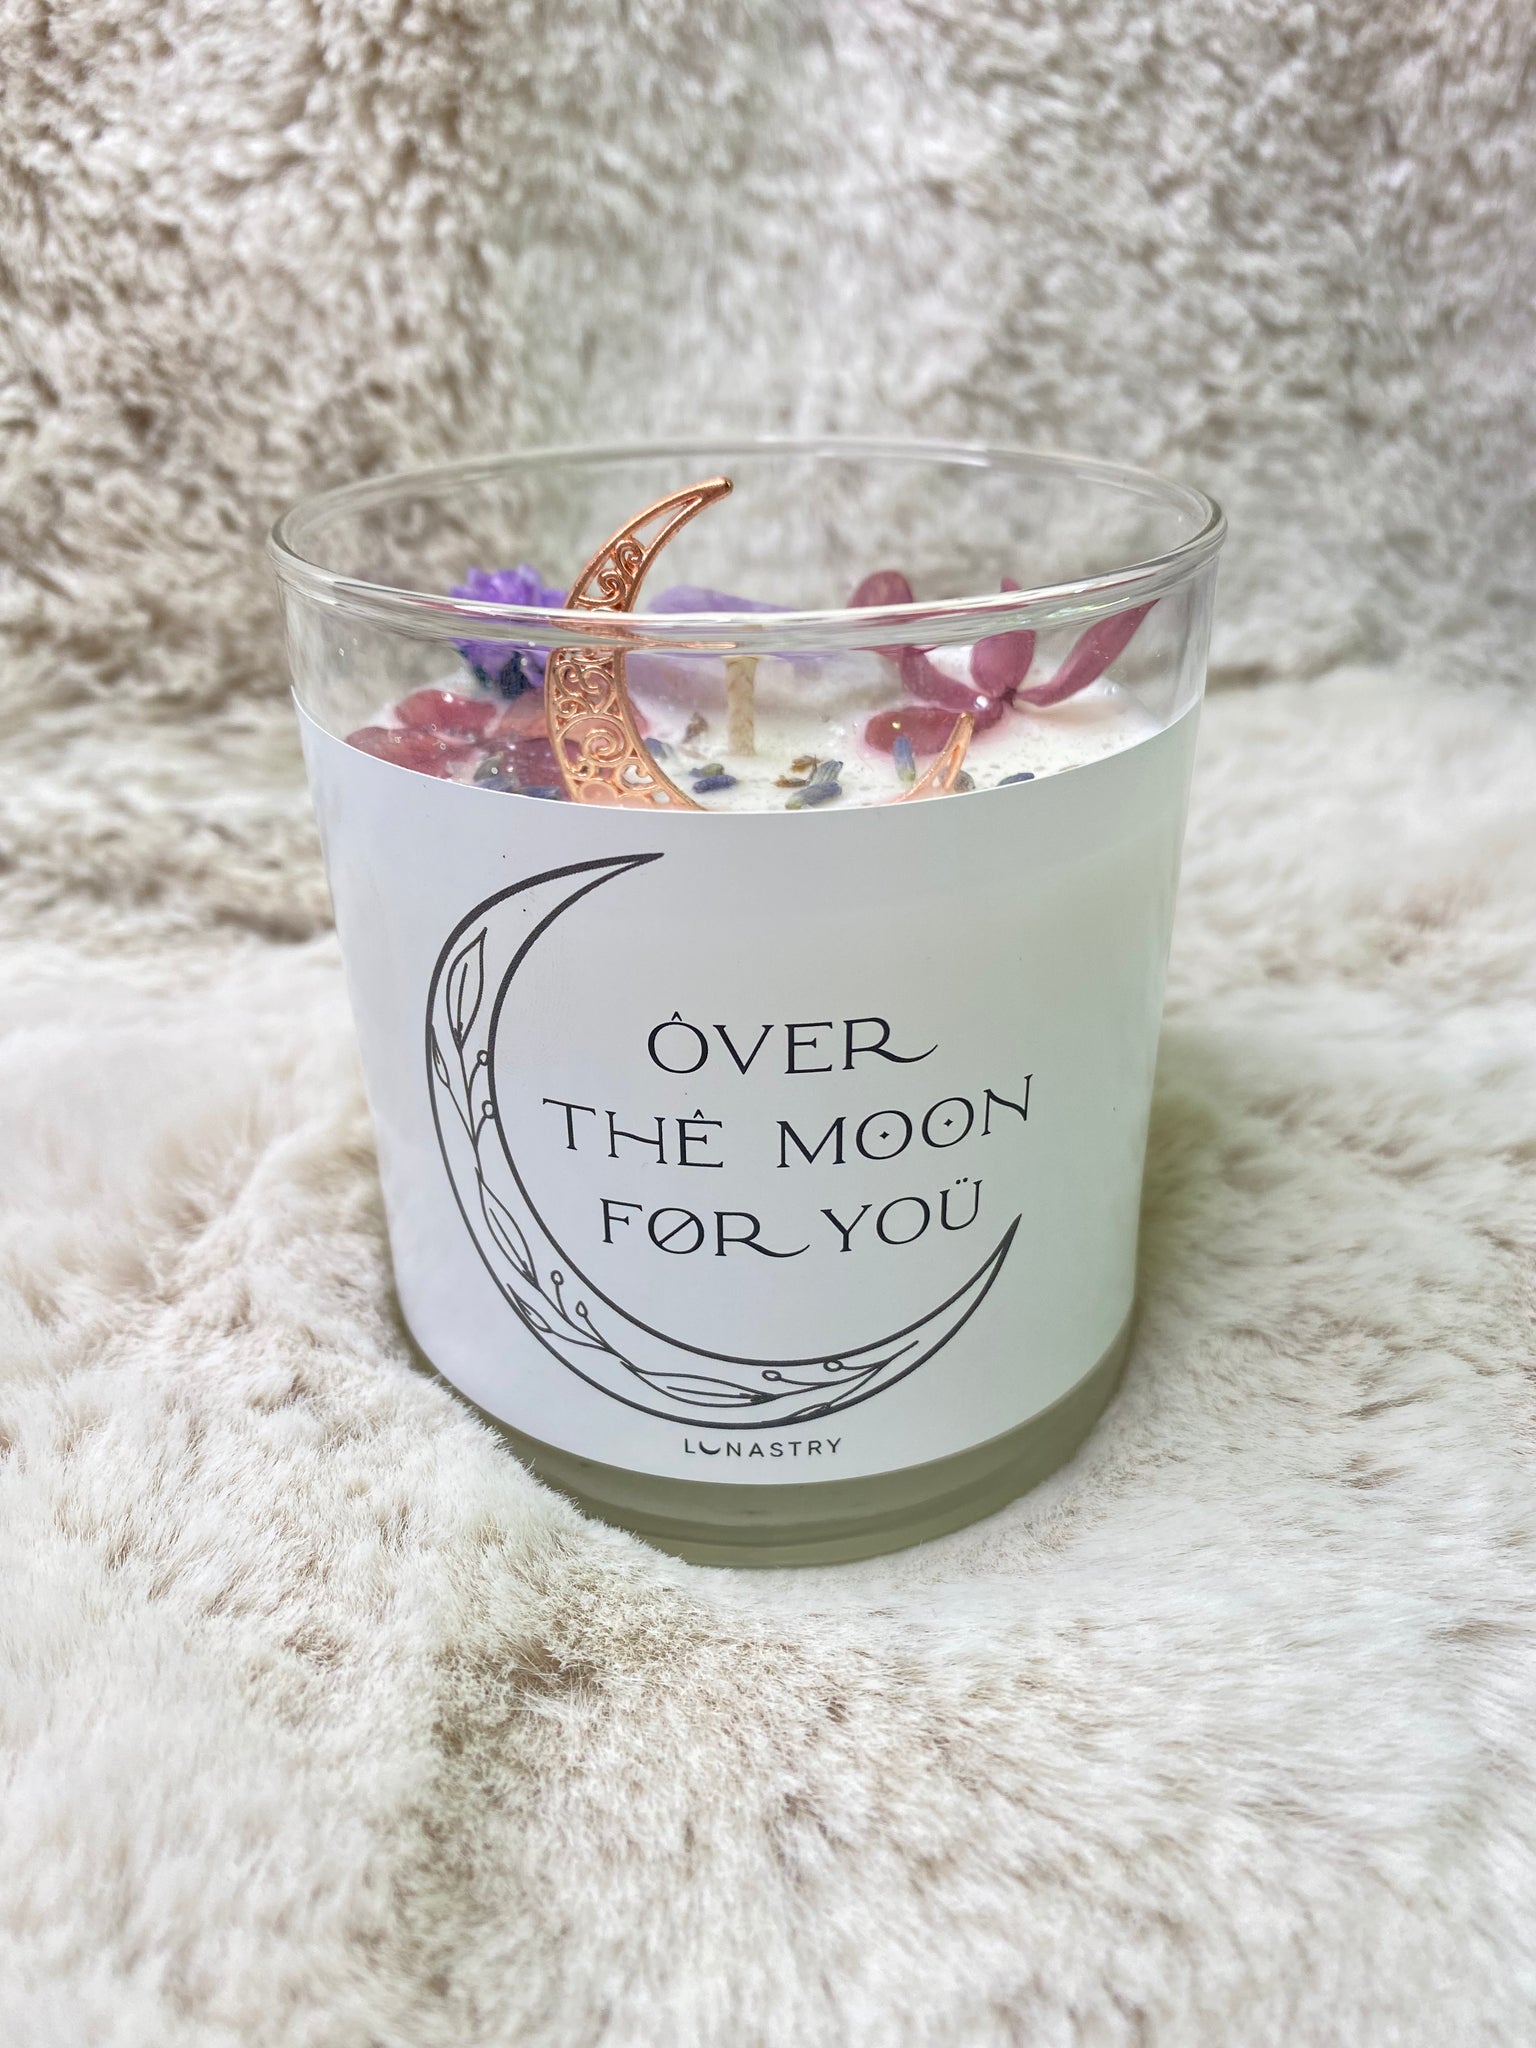 Lunastry Soy Wax & Crystal Candles - Over The Moon For You